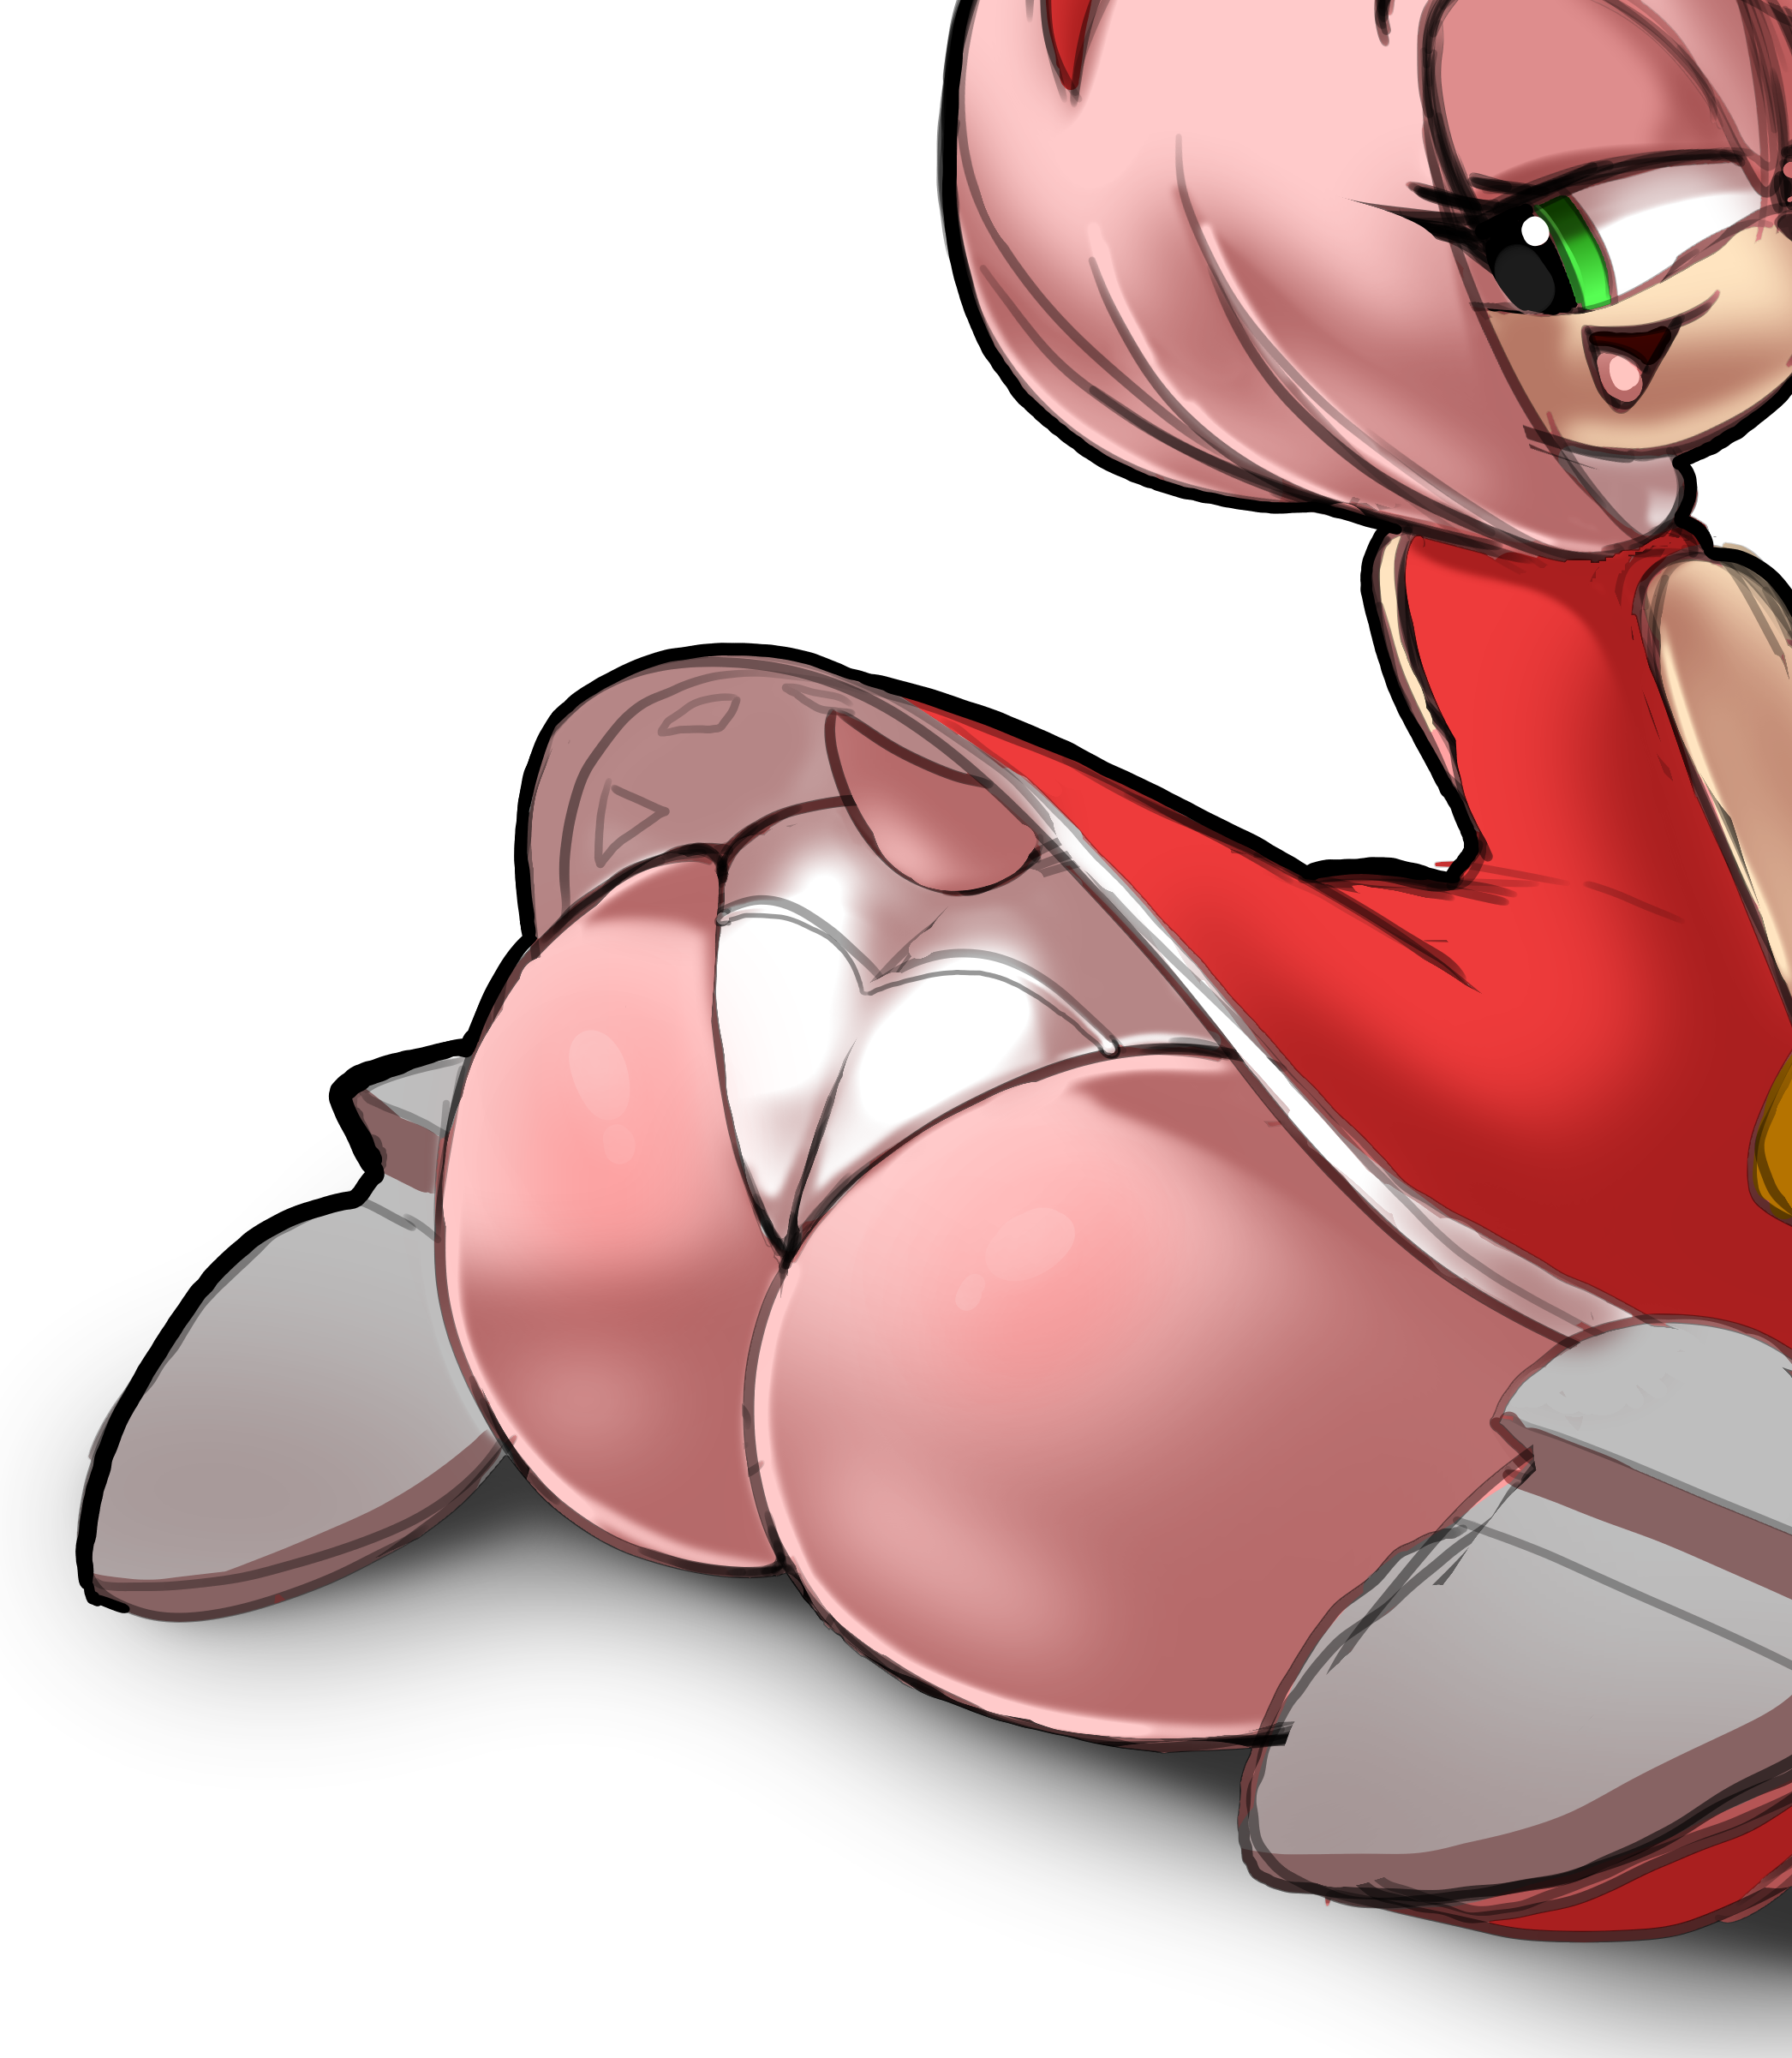 Amy Booty 3 by Parumpi < Submission | Inkbunny, the Furry Art Community